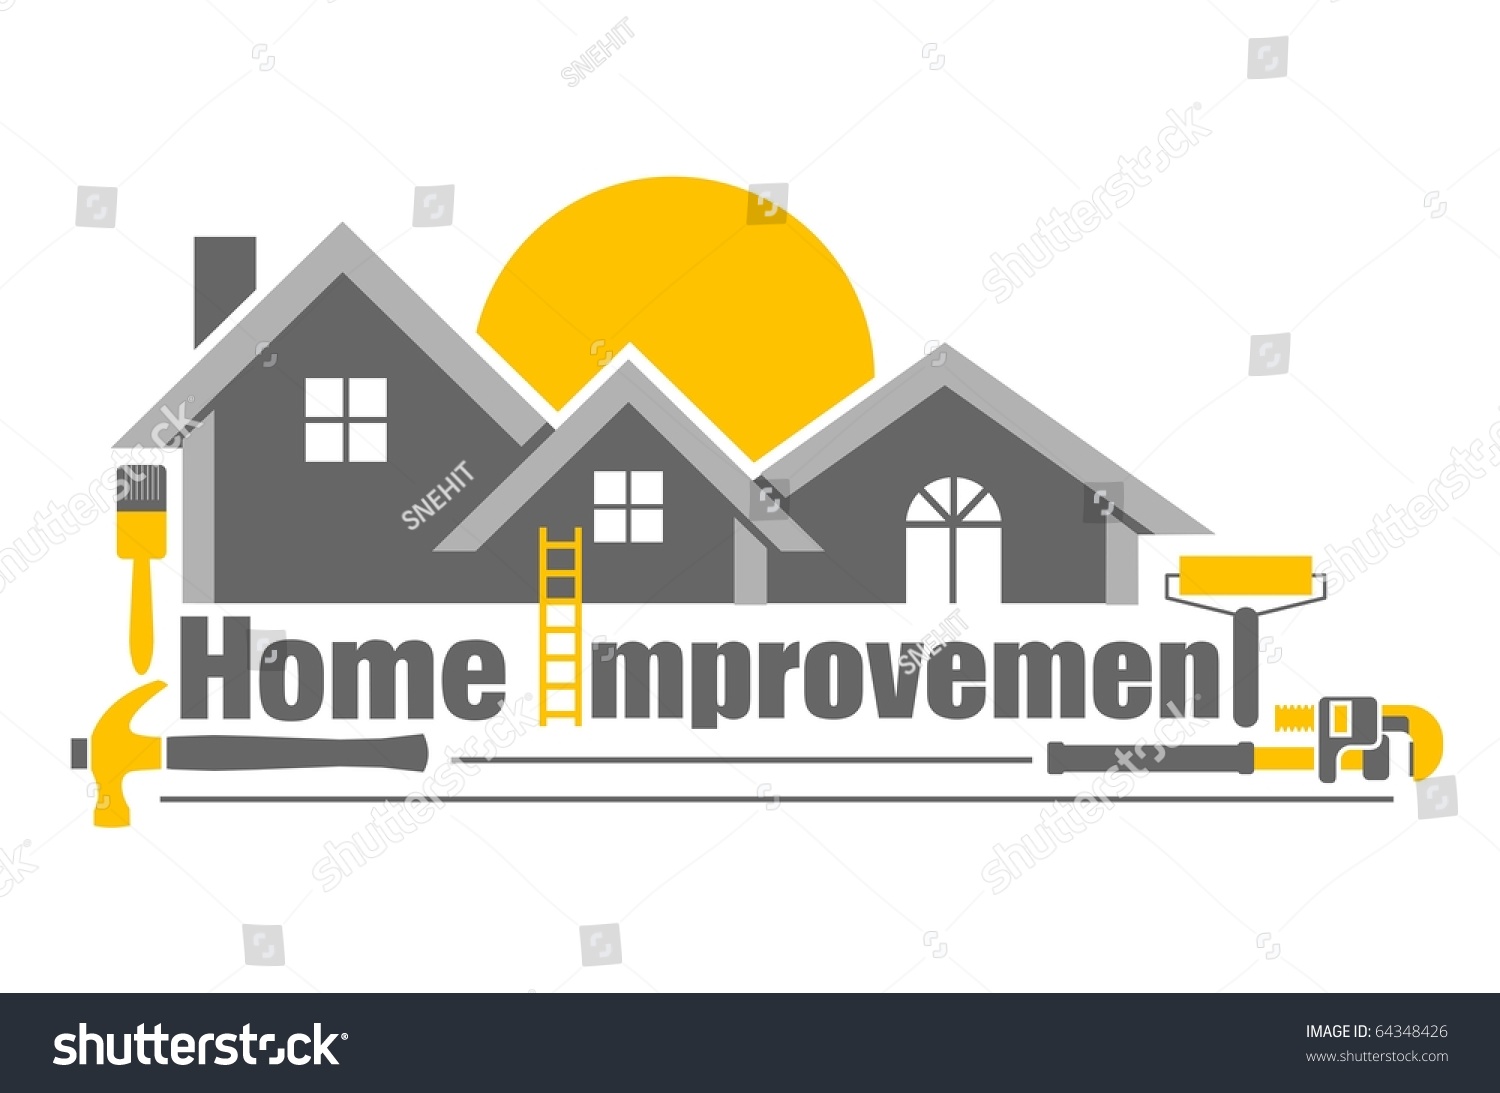 home remodeling clipart - photo #22